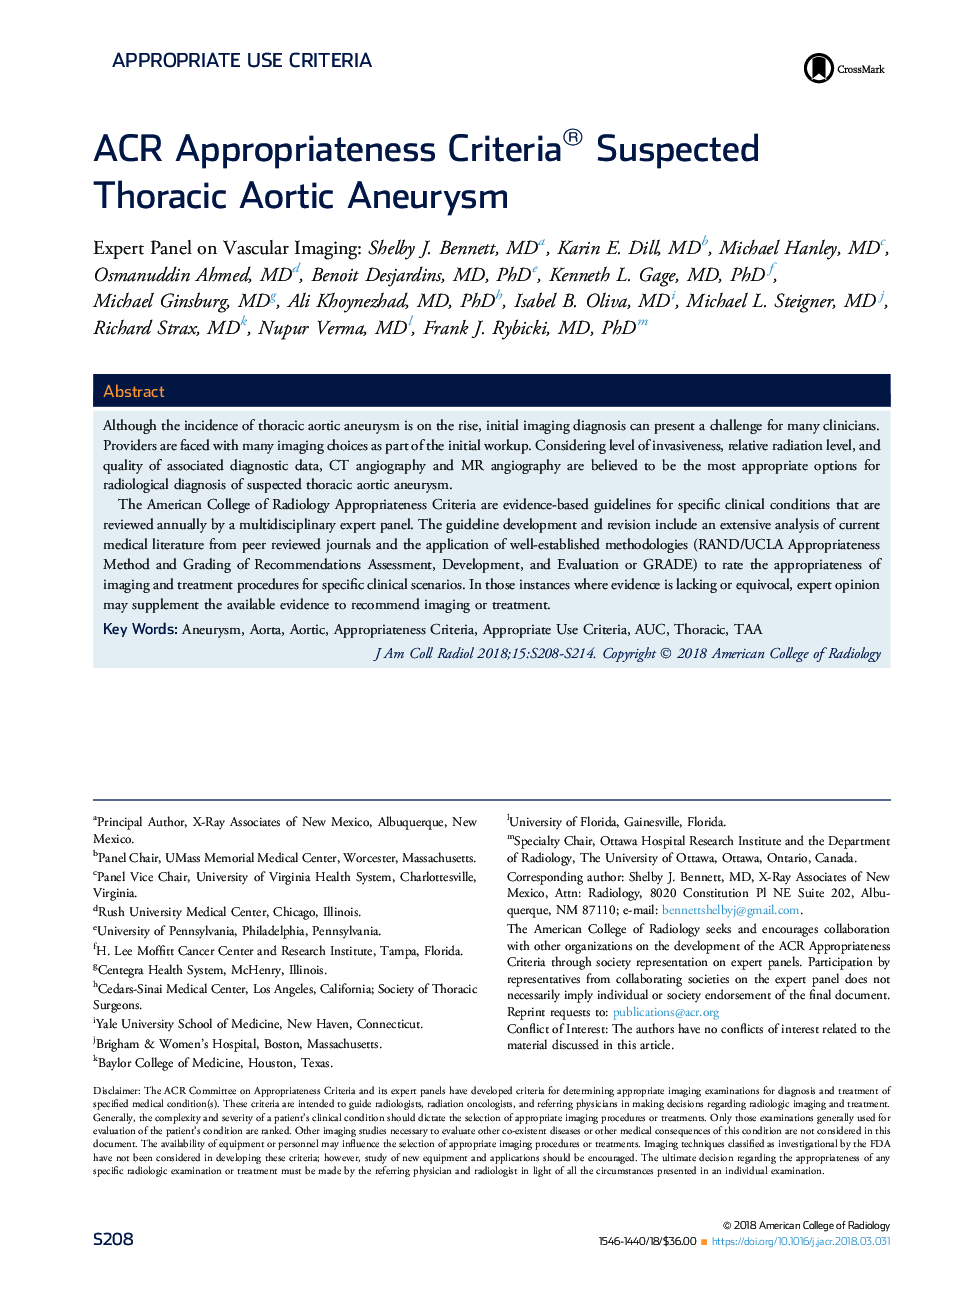 ACR Appropriateness Criteria® Suspected Thoracic Aortic Aneurysm